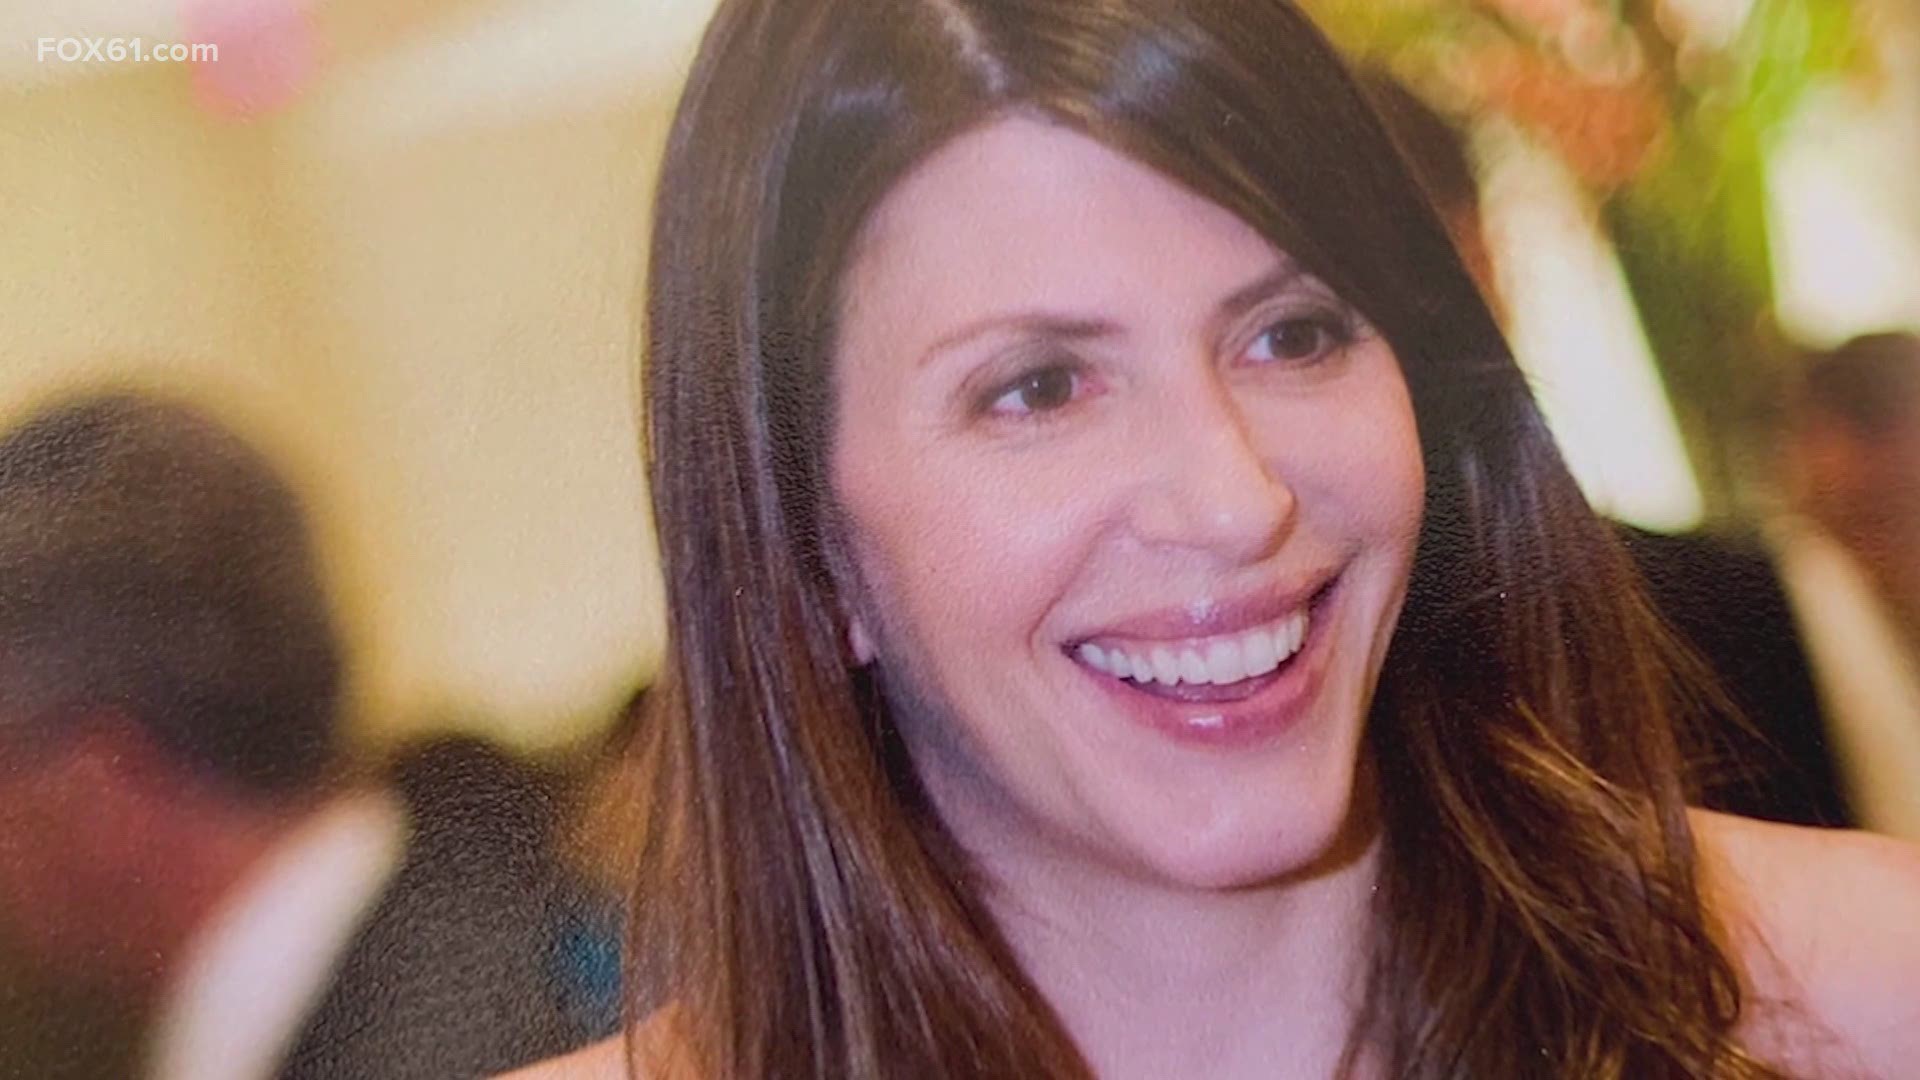 Jennifer has been missing for more than 530 days and is presumed killed by her estranged husband Fotis Dulos on May 24, 2019.